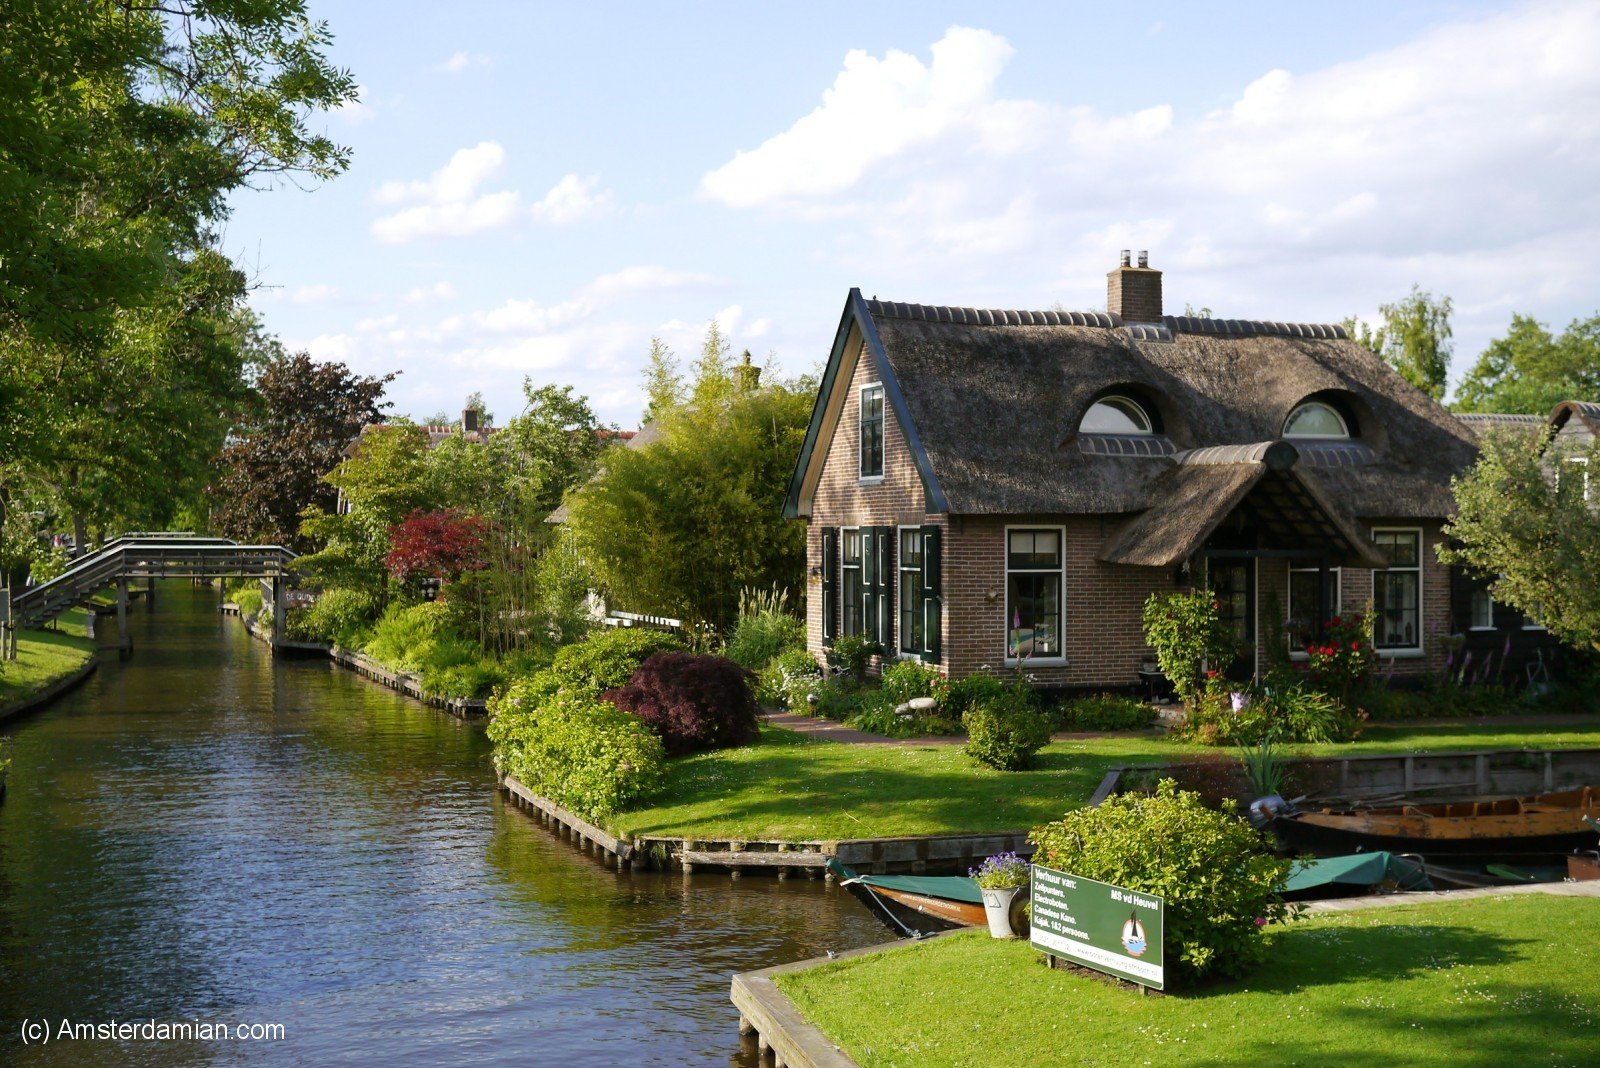 Visiting the fairy-tale village of Giethoorn | Amsterdamian